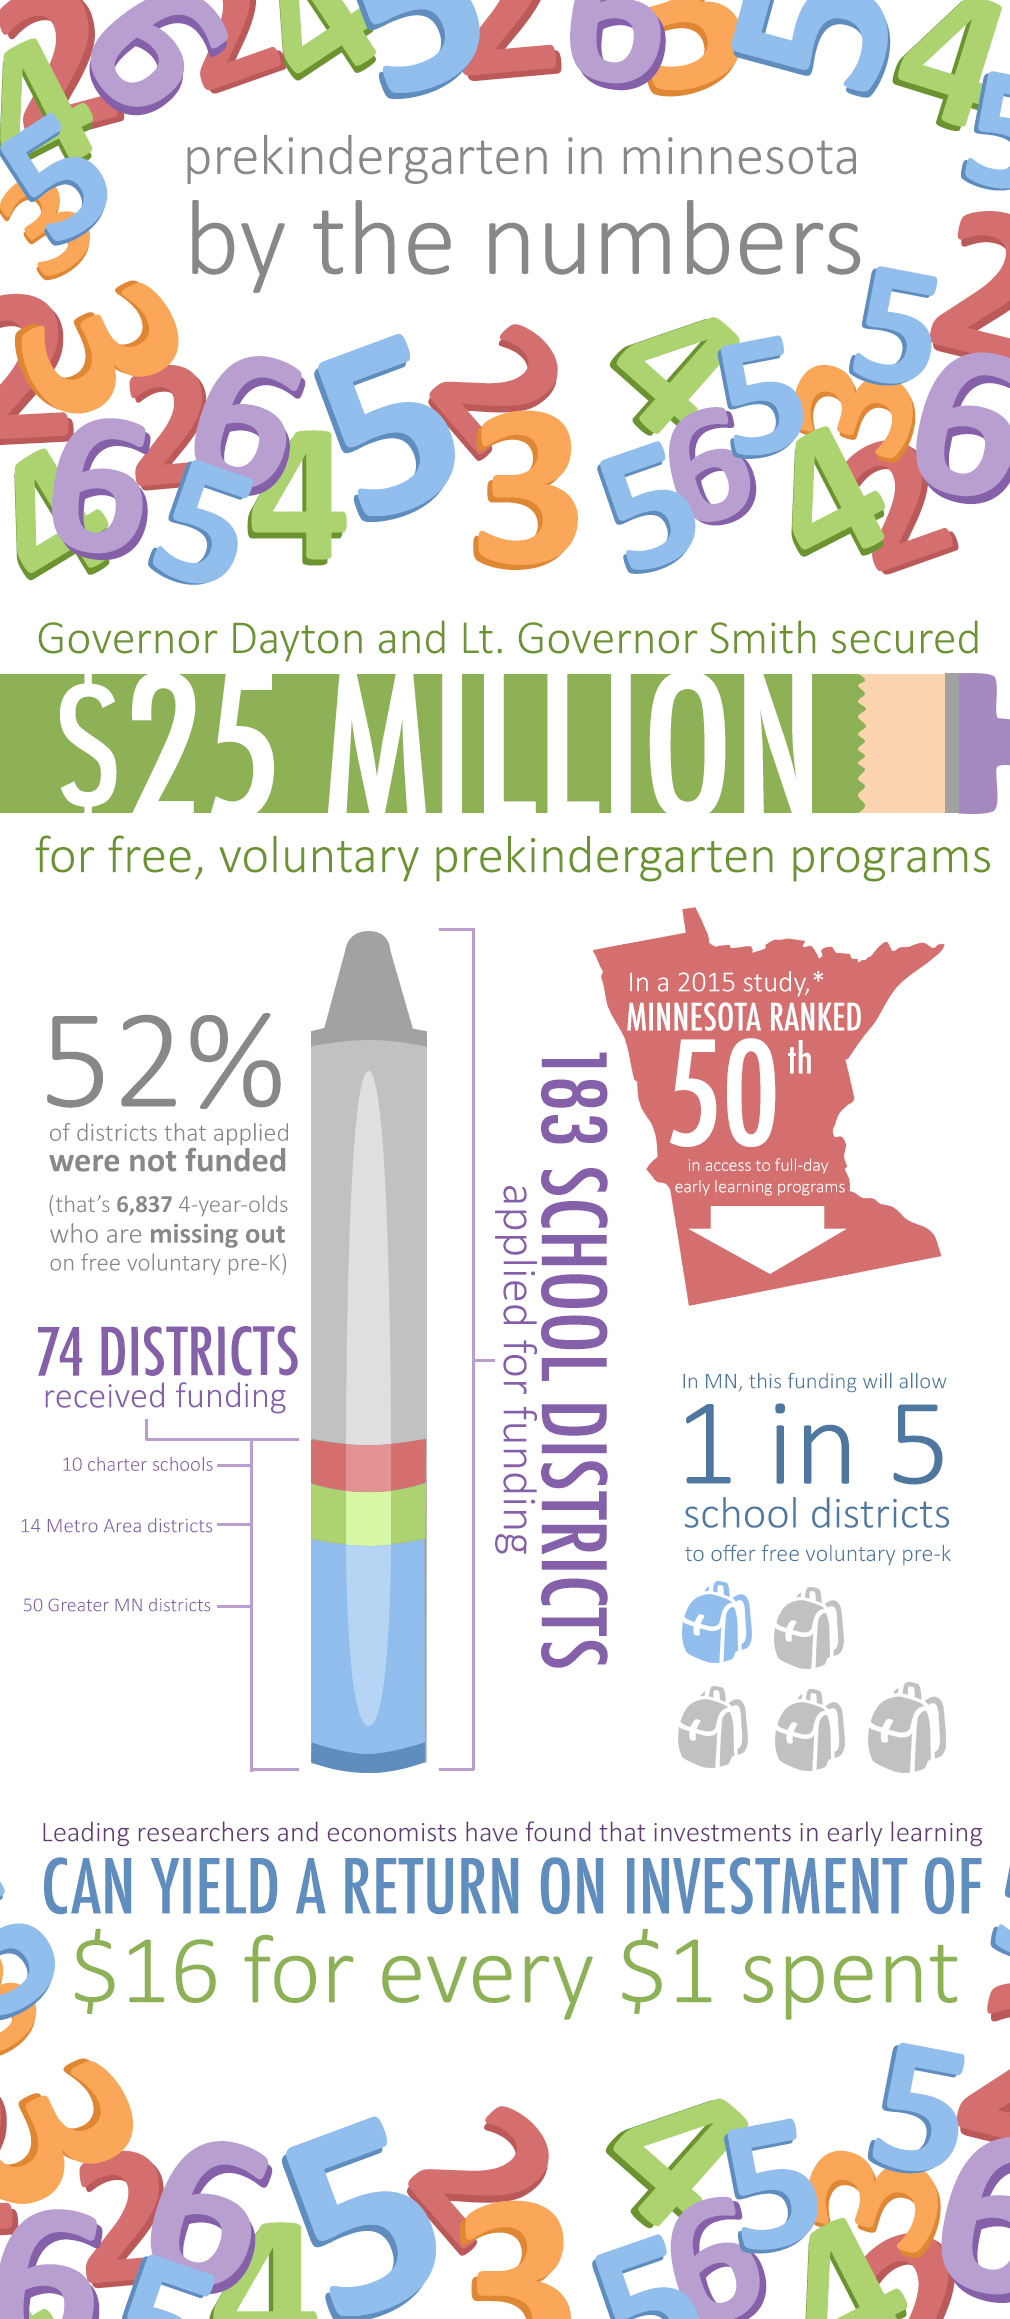 Prekindergarten in Minnesota by the numbers: Governor Dayton and Lt. Governor Smith secured $25 million for free, voluntary prekindergarten programs, 183 schools applied for funding, 74 districts received funding (10 charter schools, 14 metro area districts, 50 Greater MN districts). 52% of districts that applied were not funded. That's 6,837 4-year-olds who are missing out on free voluntary pre-k. In a 2015 study, Minnesota ranked 50th in access to full-day early learning programs. In MN, this funding will allow 1 in 5 school districts to offer voluntary pre-k. Leading researchers and economists have found that investments in early learning can yield a return on investment of $16 for every $1 spent. 